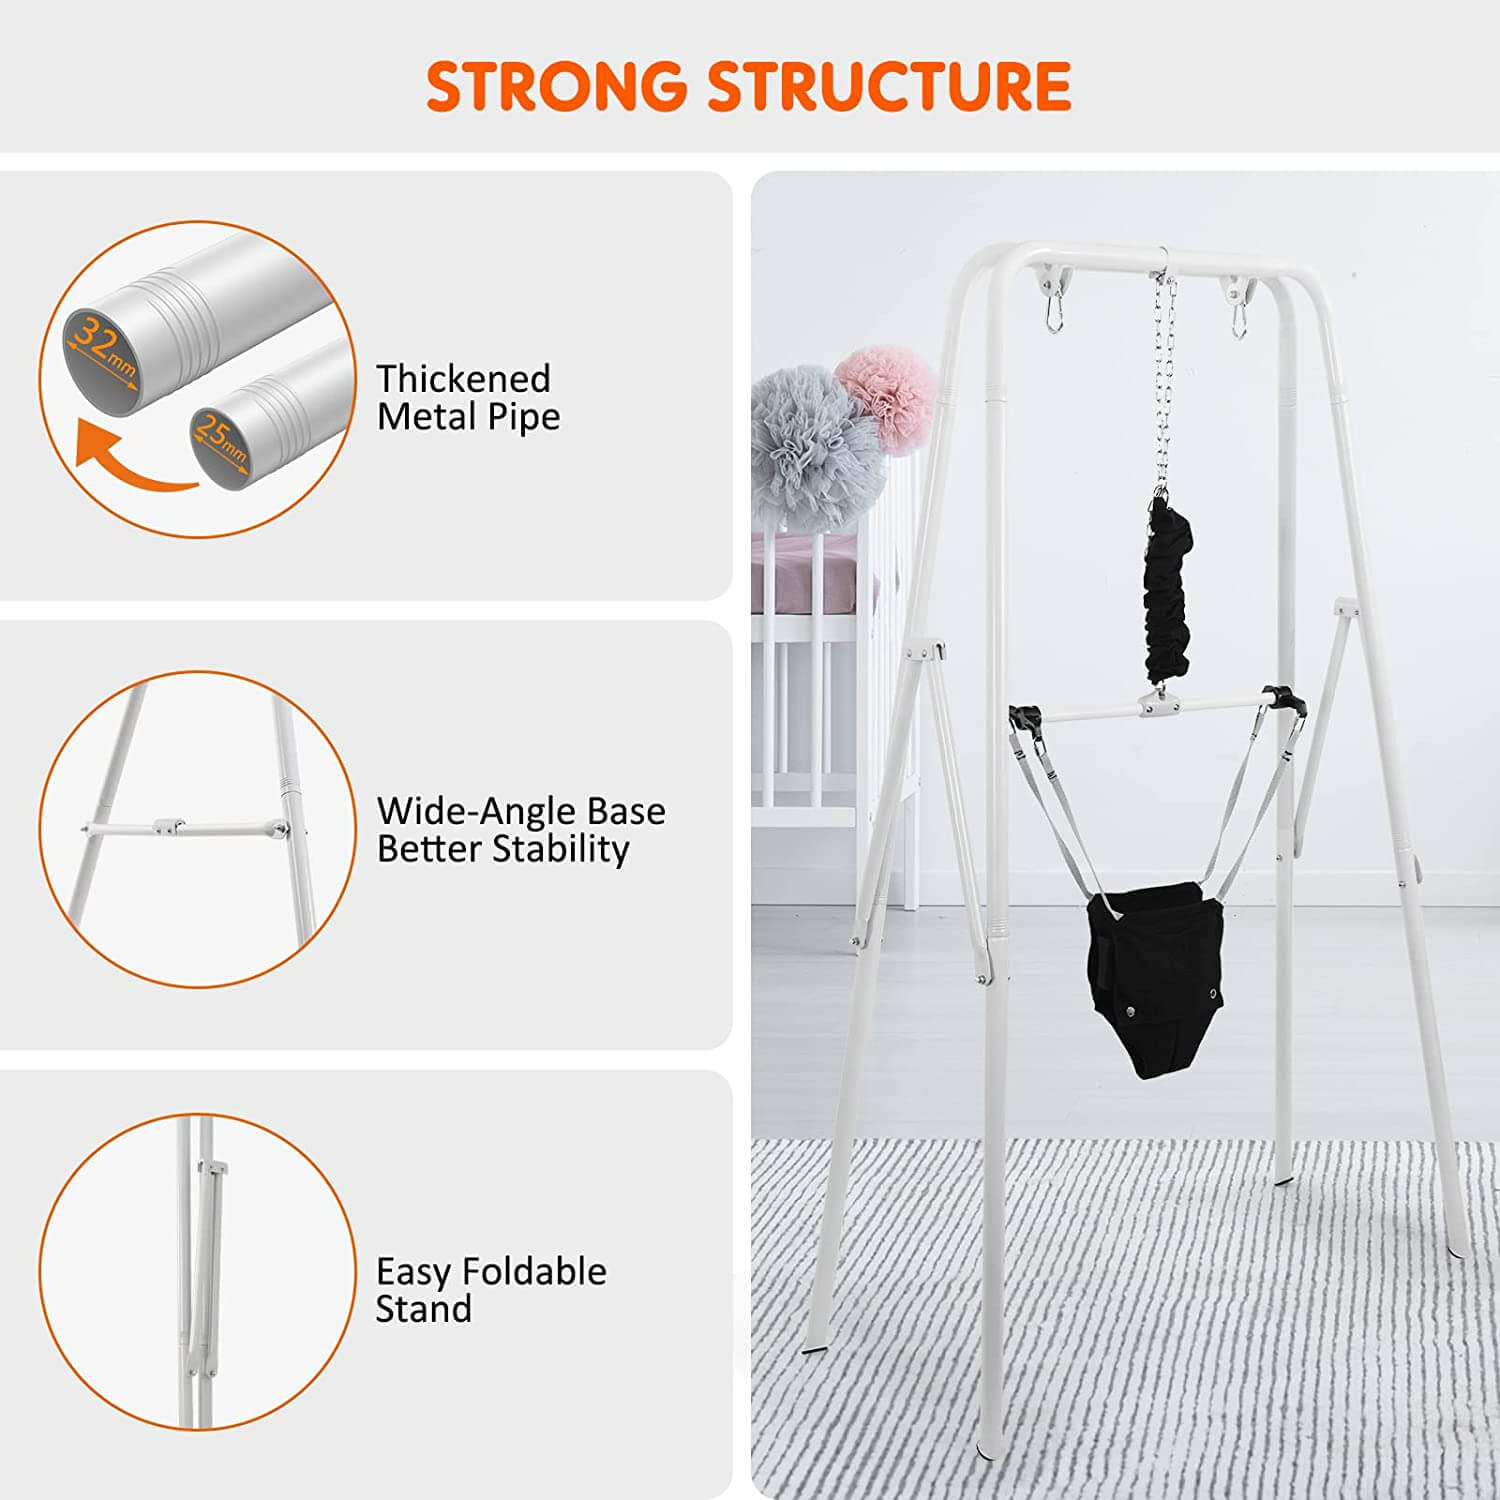 Upgraded 2 in 1 Baby Jumper and Toddler Swing with Foldable Stand